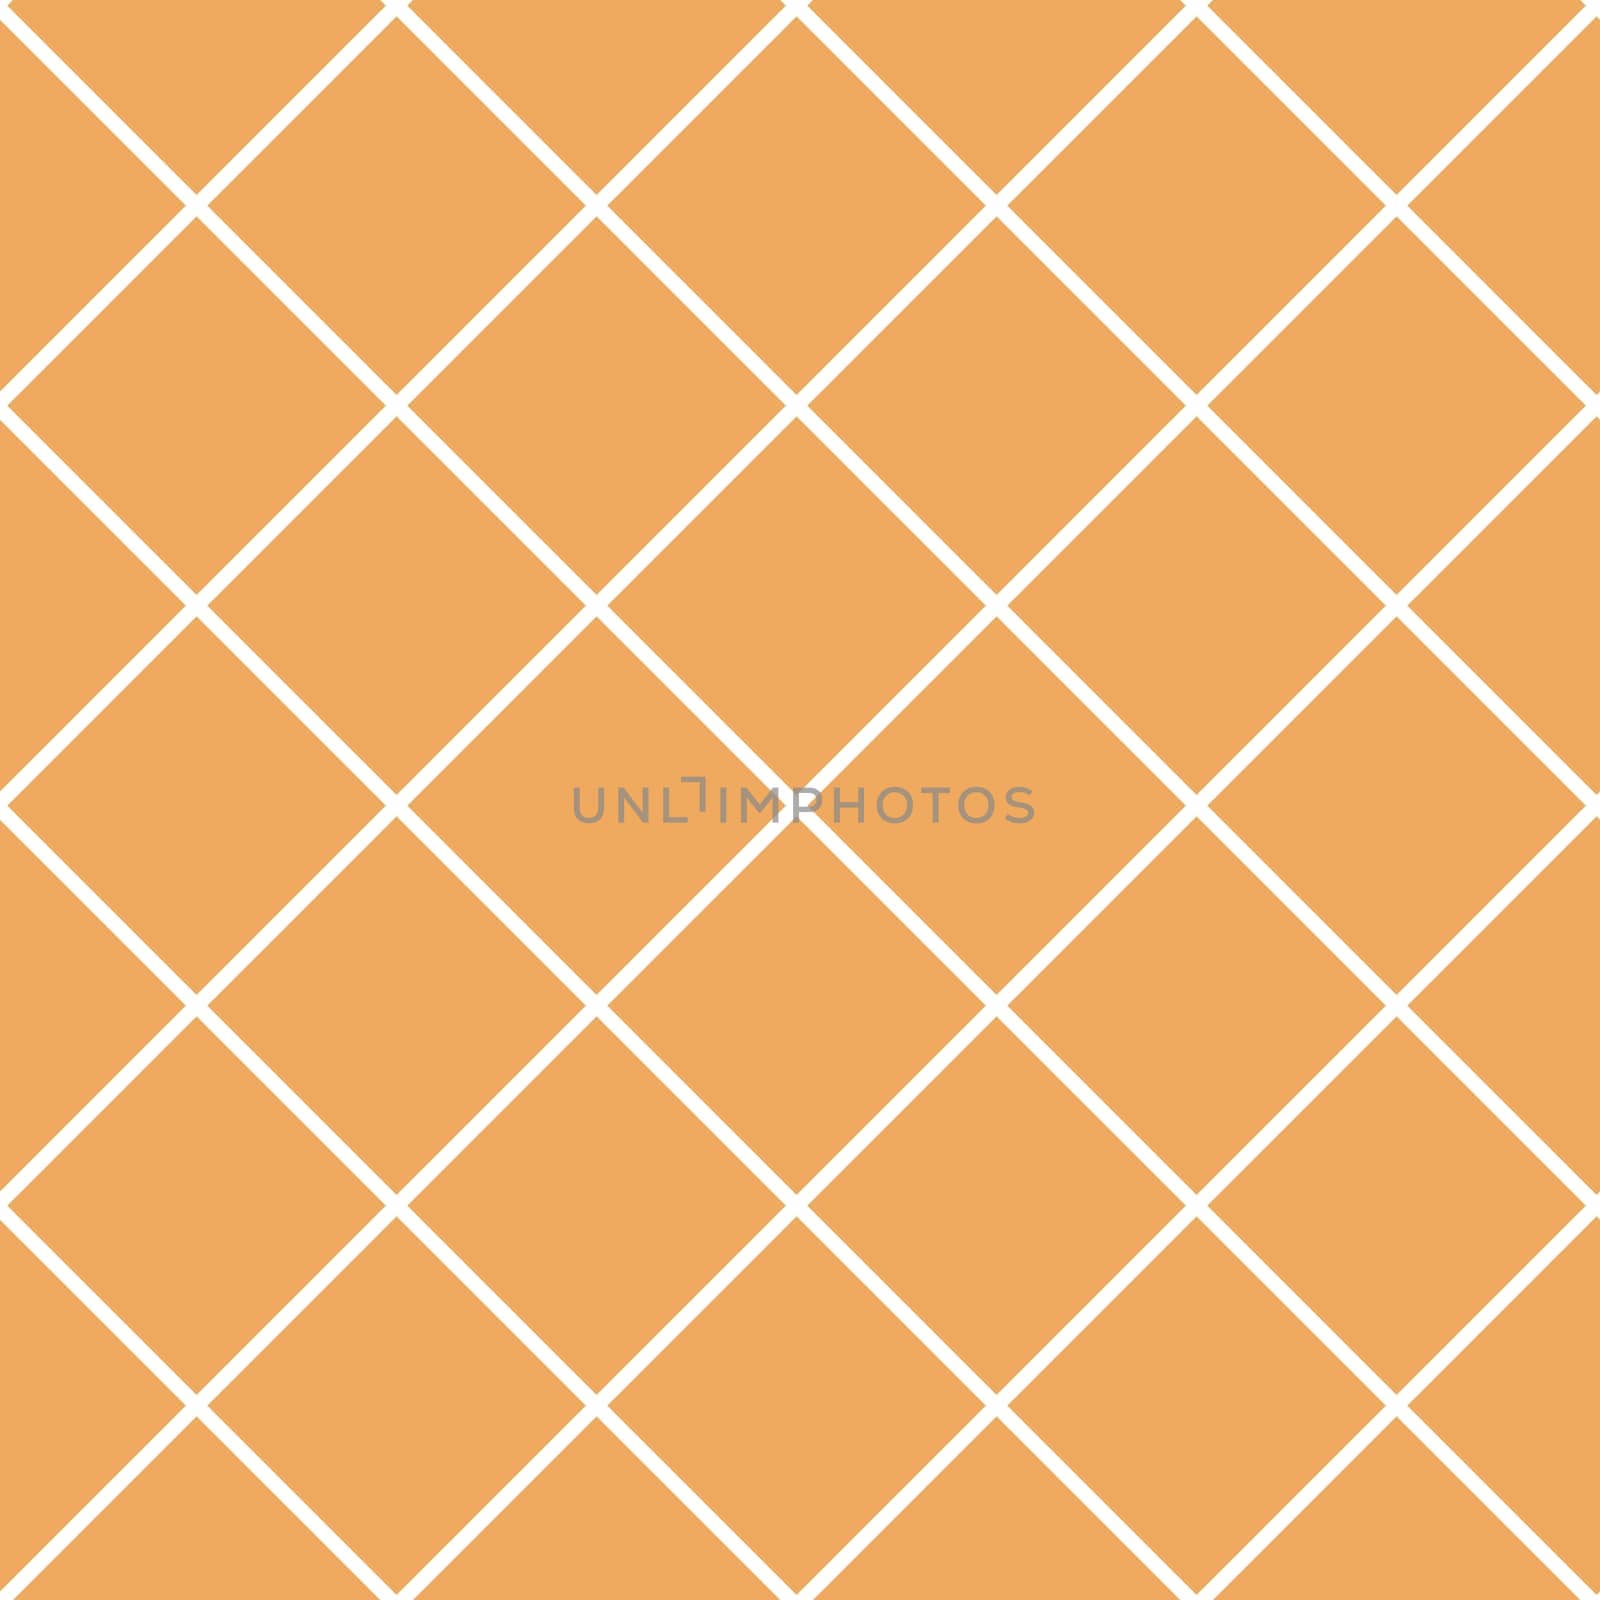 simple check pattern minimalism. white cage on an orange background. High quality photo